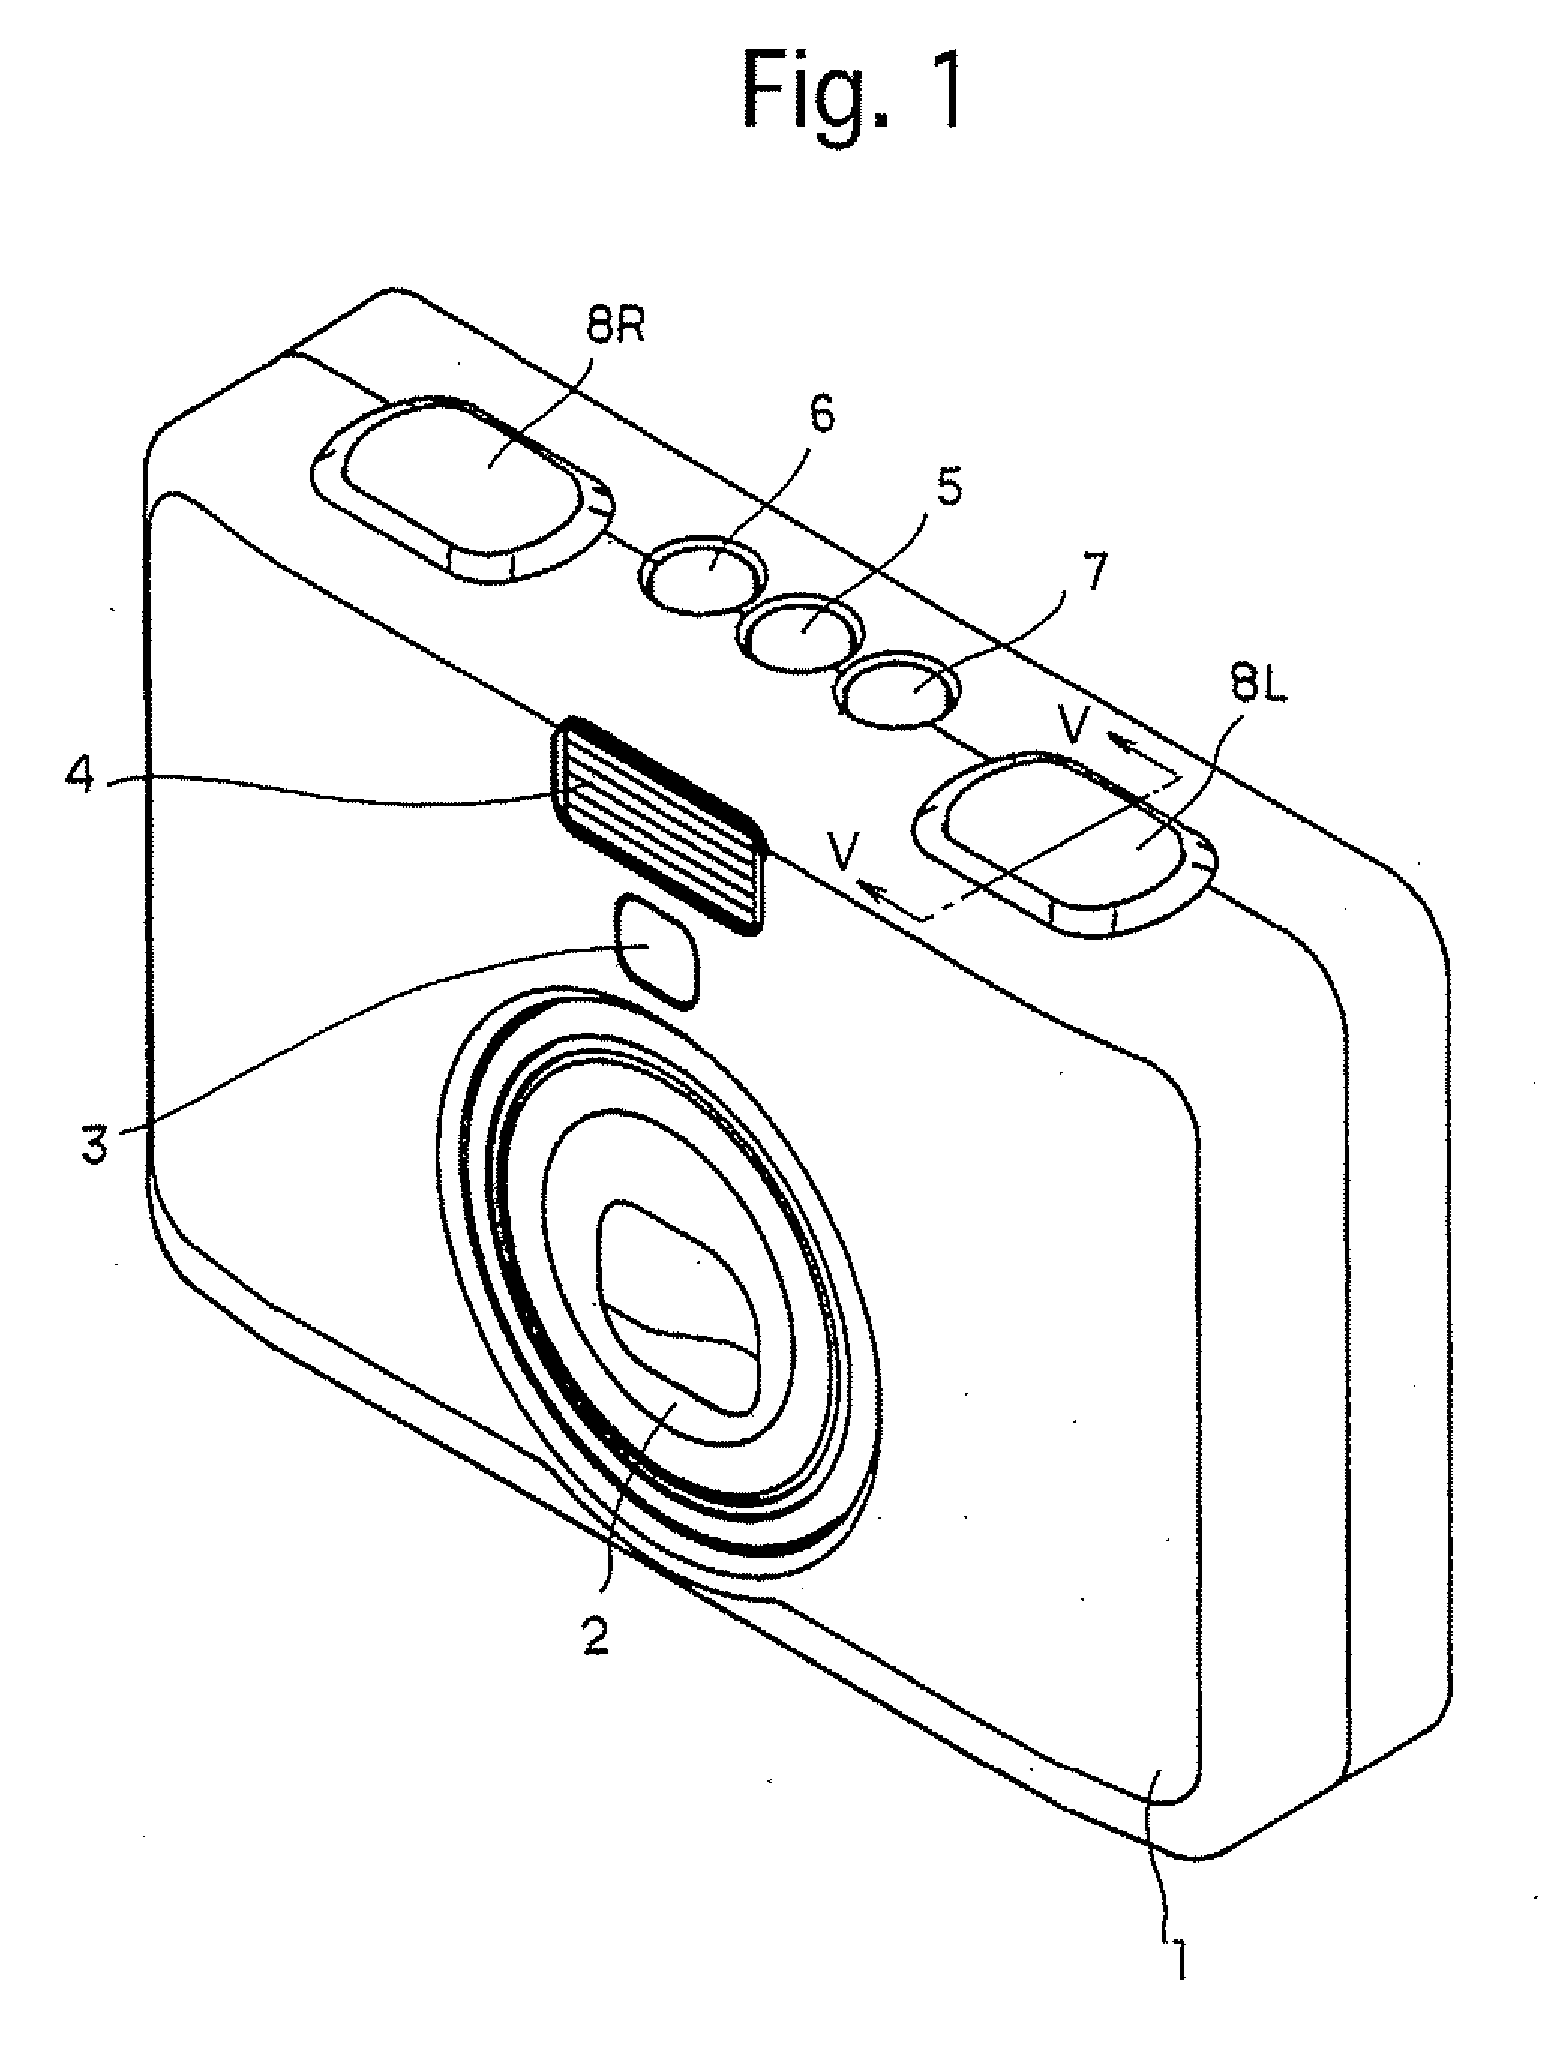 Electroluminescent display device and a digital camera using an electroluminescent display device